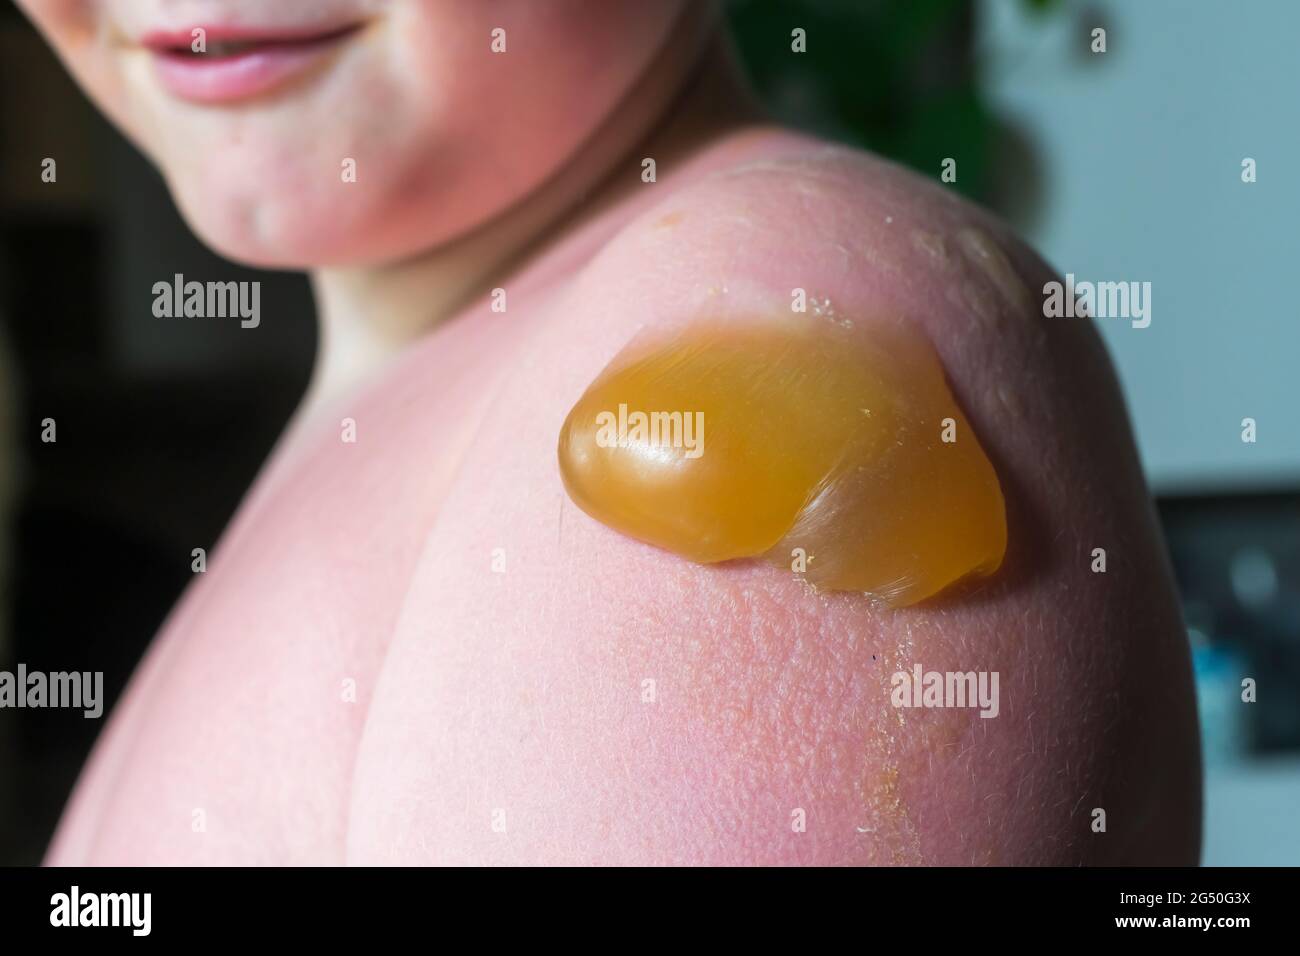 Thick nasty blister from a sunburn Stock Photo